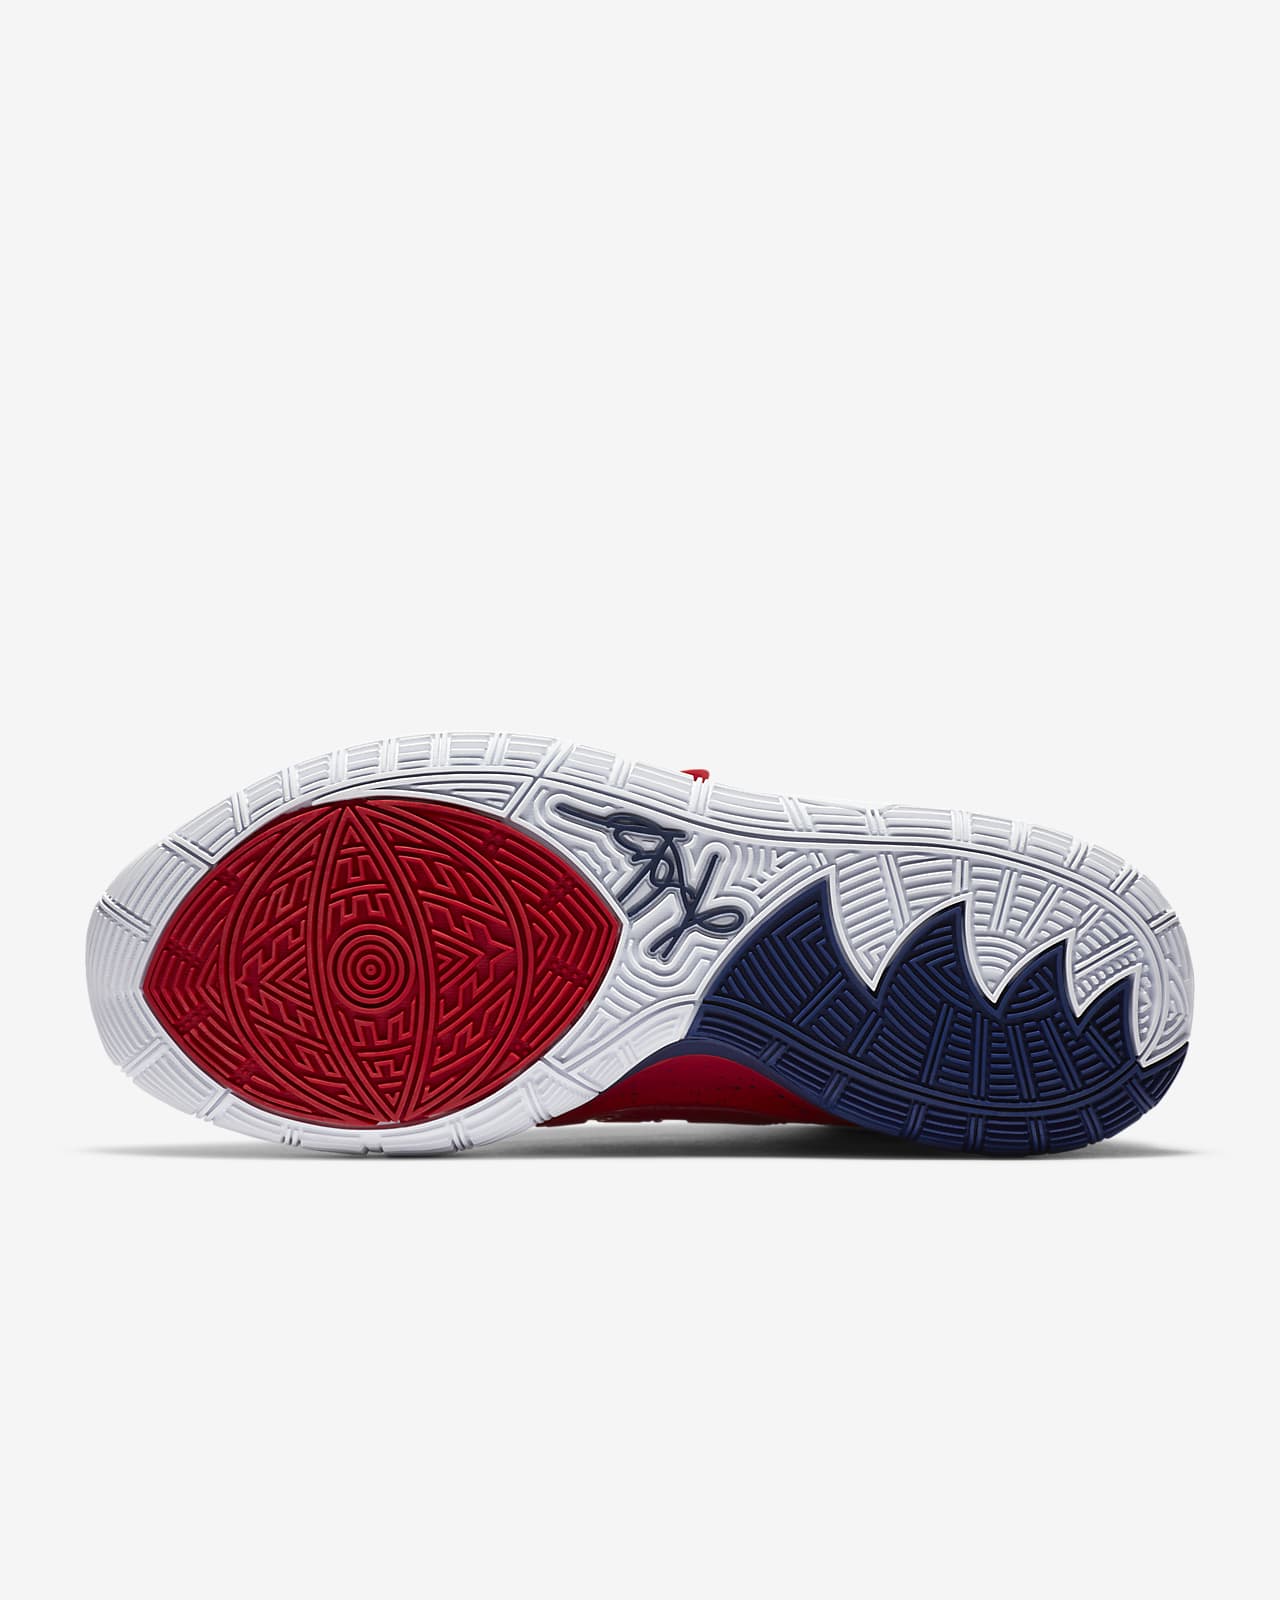 Buy Nike Kyrie 6 Only £109 Today RunRepeat